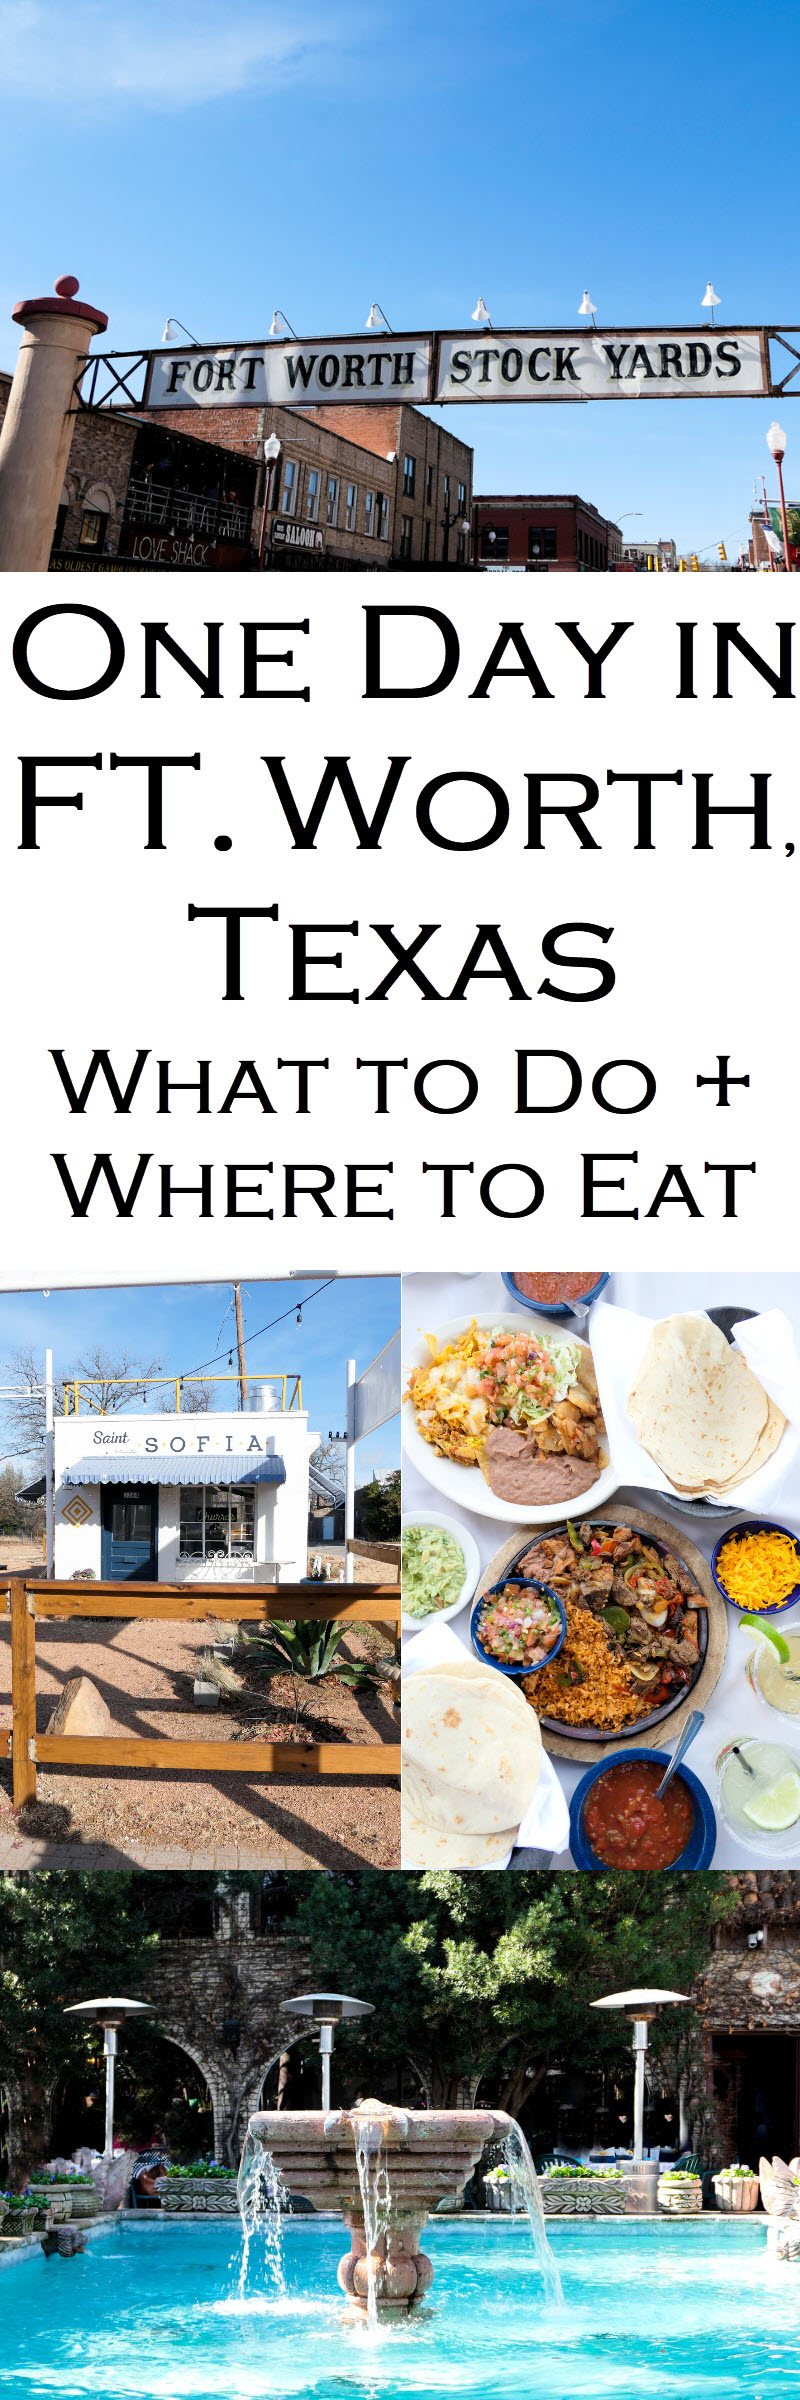 What to Do in Ft. Worth for 1 Day Travel Guide - Where to Eat #texas #ftworth #dallasftworth #travel #travelguide #travelinspiration #travelblog #travelblogger #wanderlust 